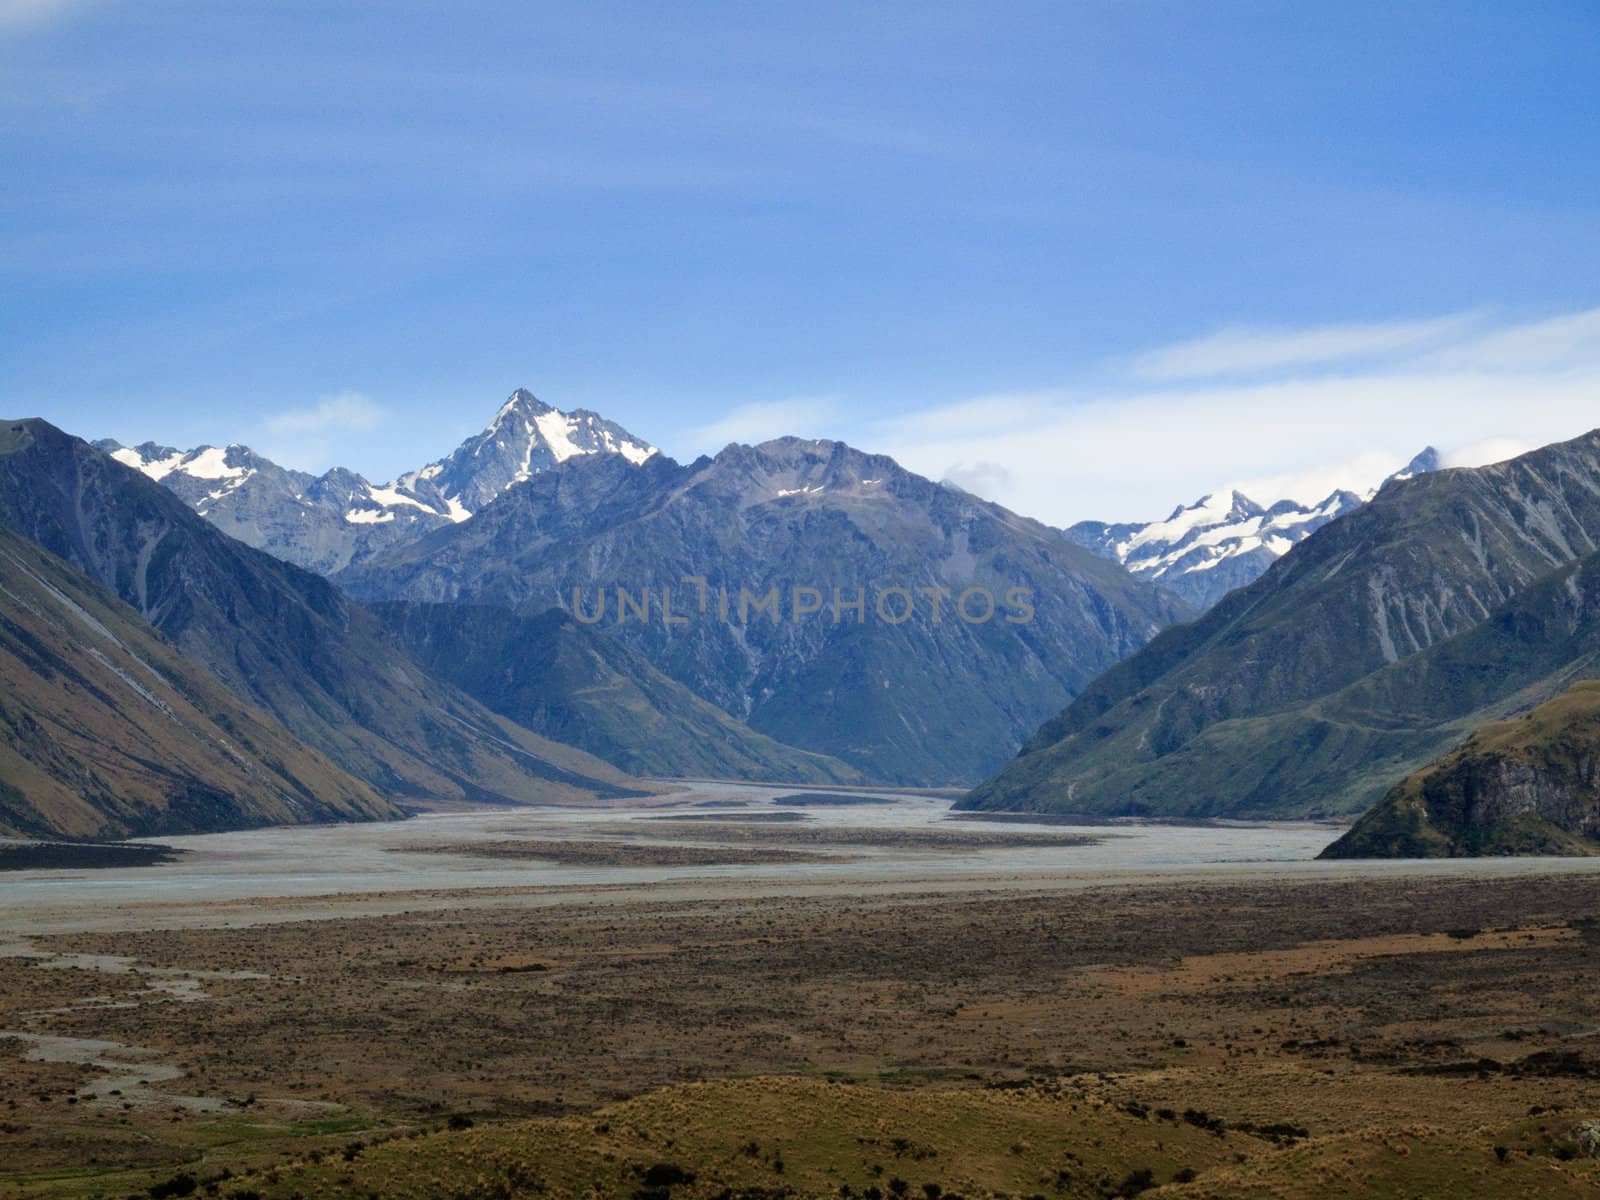 Mount Cook over a grassy plain by steheap